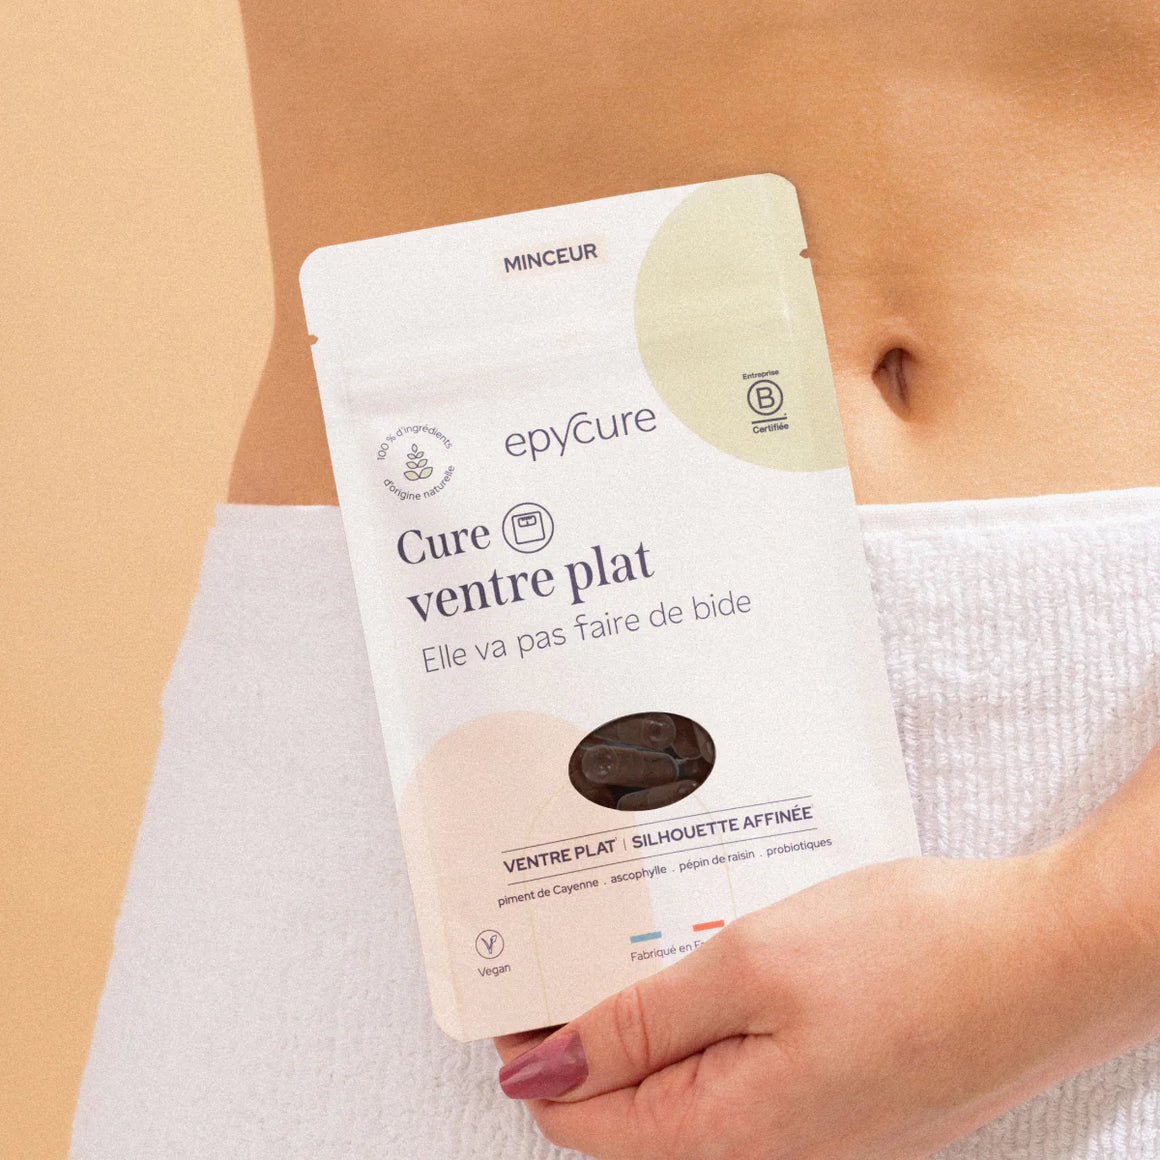 Flat Stomach Cure - 1 Month by Epycure model